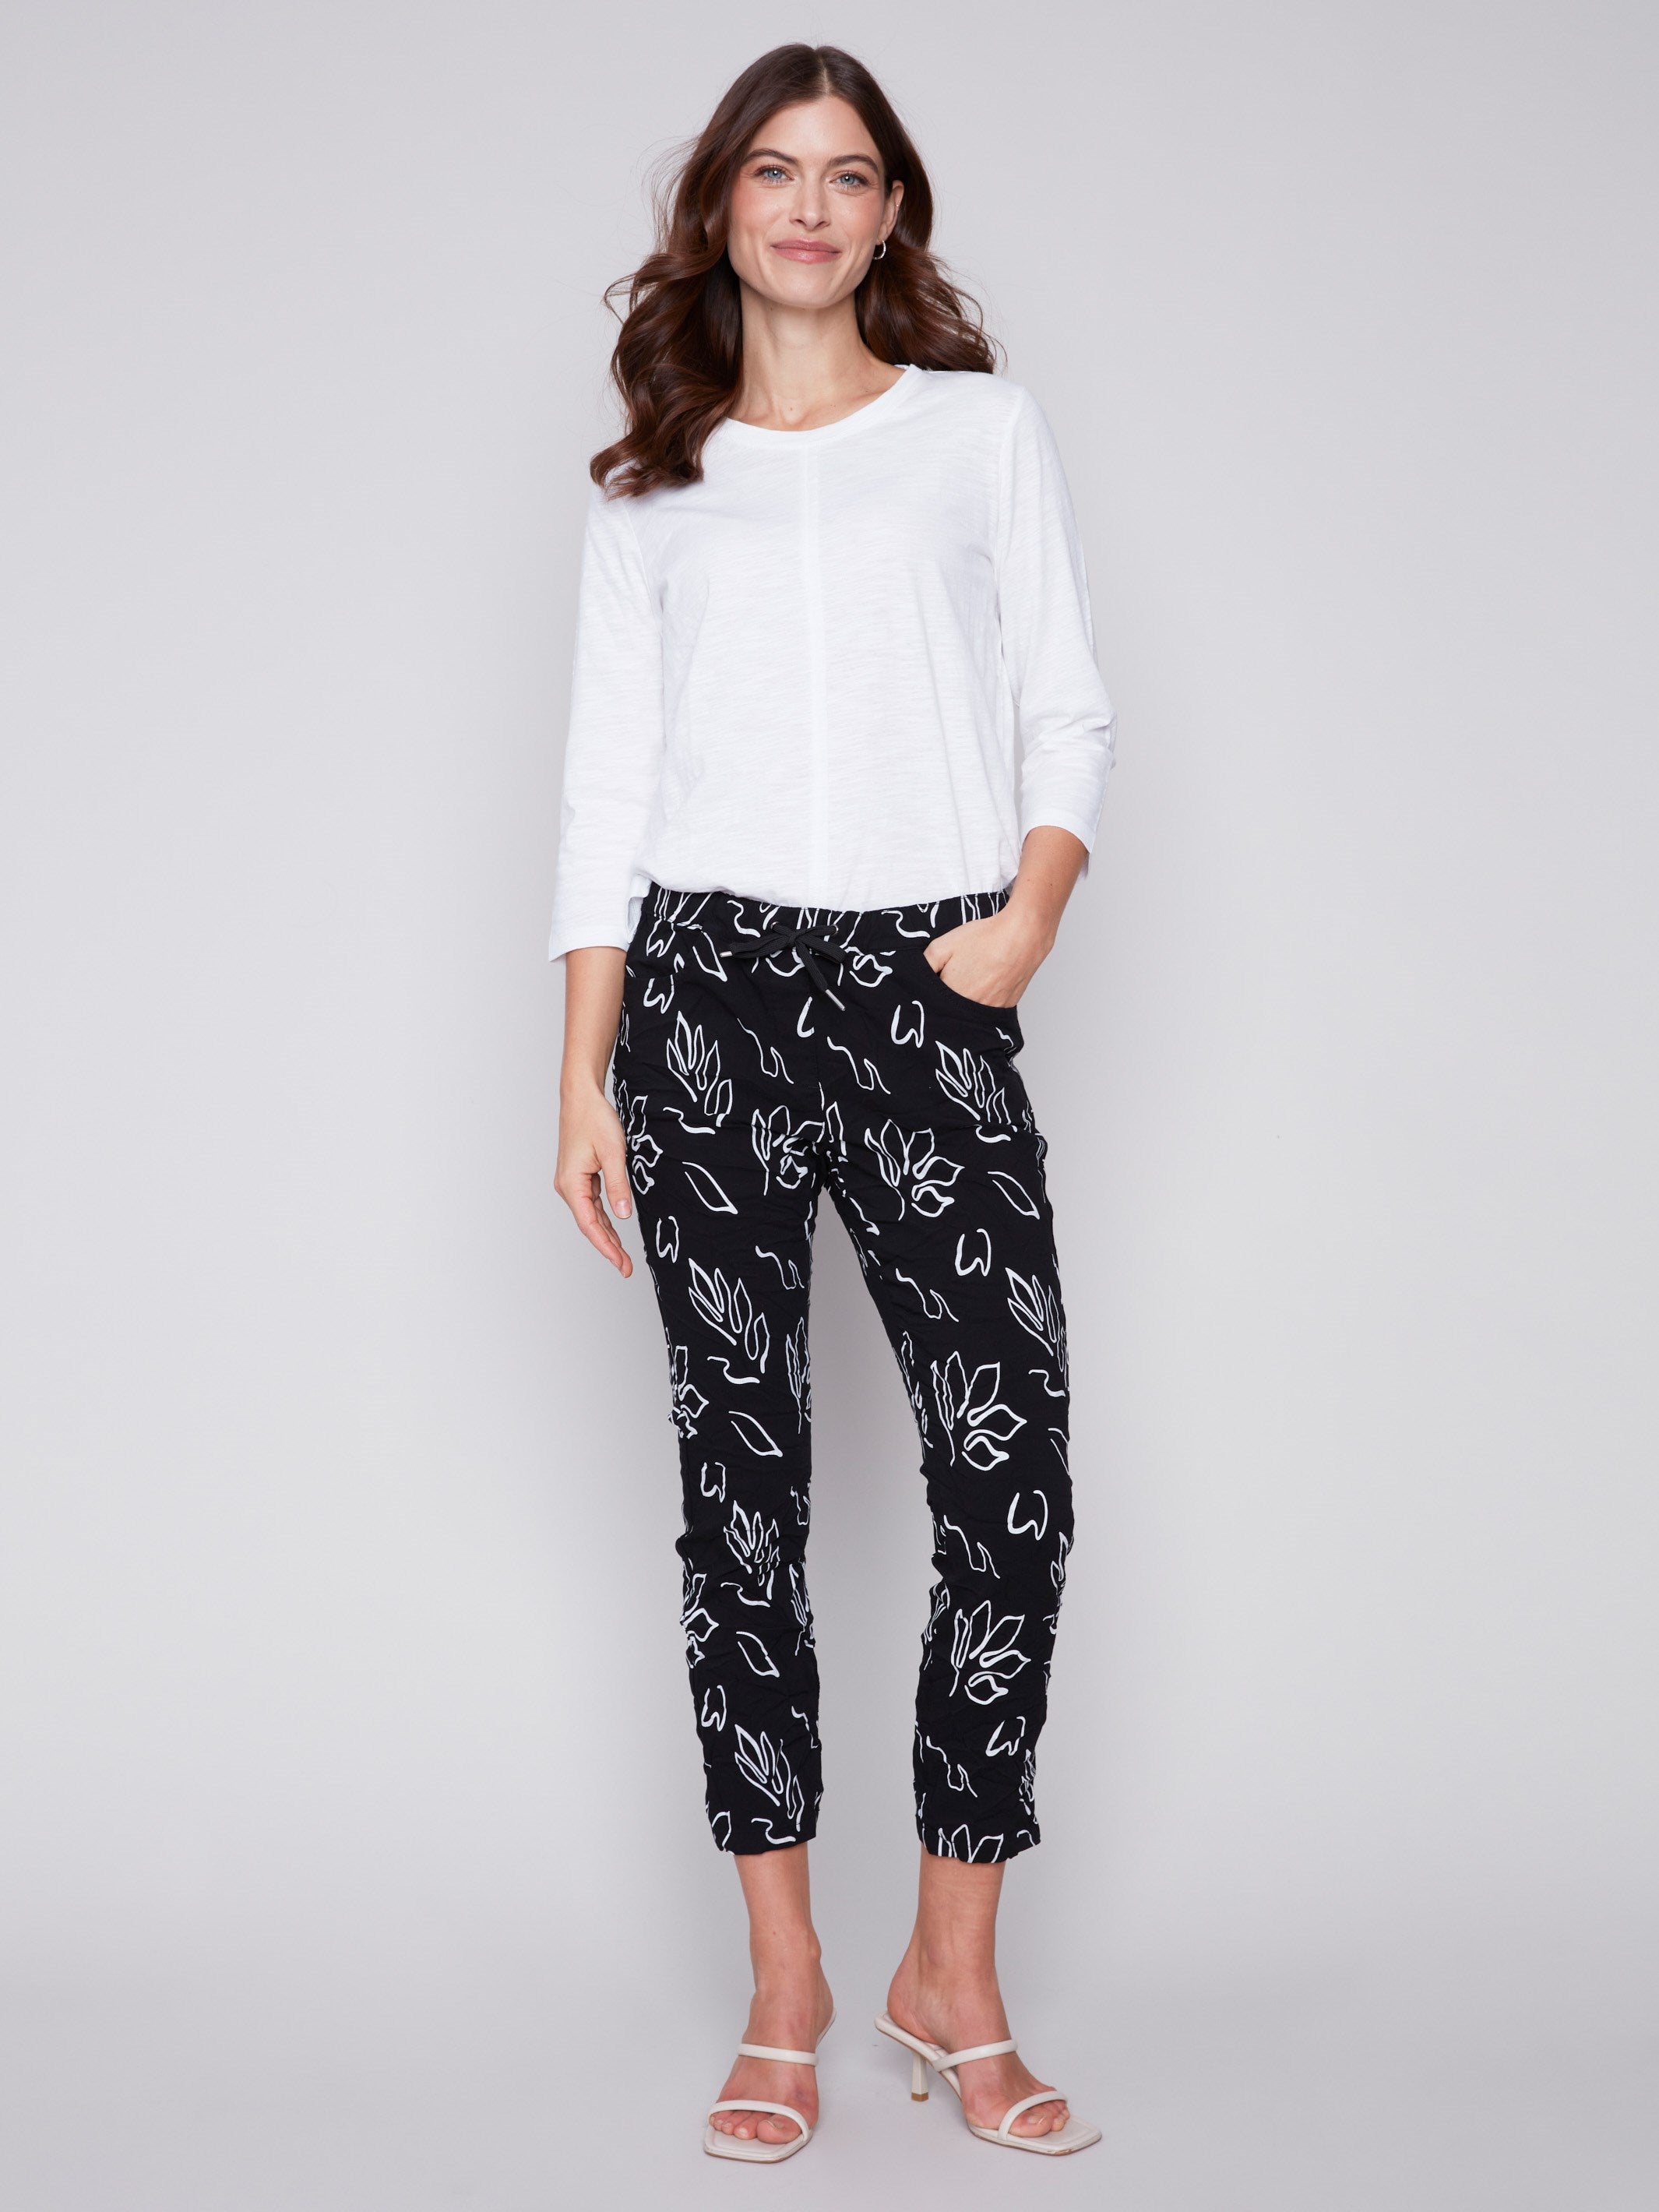 Printed Crinkle Jogger Pants - Leaves - Charlie B Collection Canada - Image 4